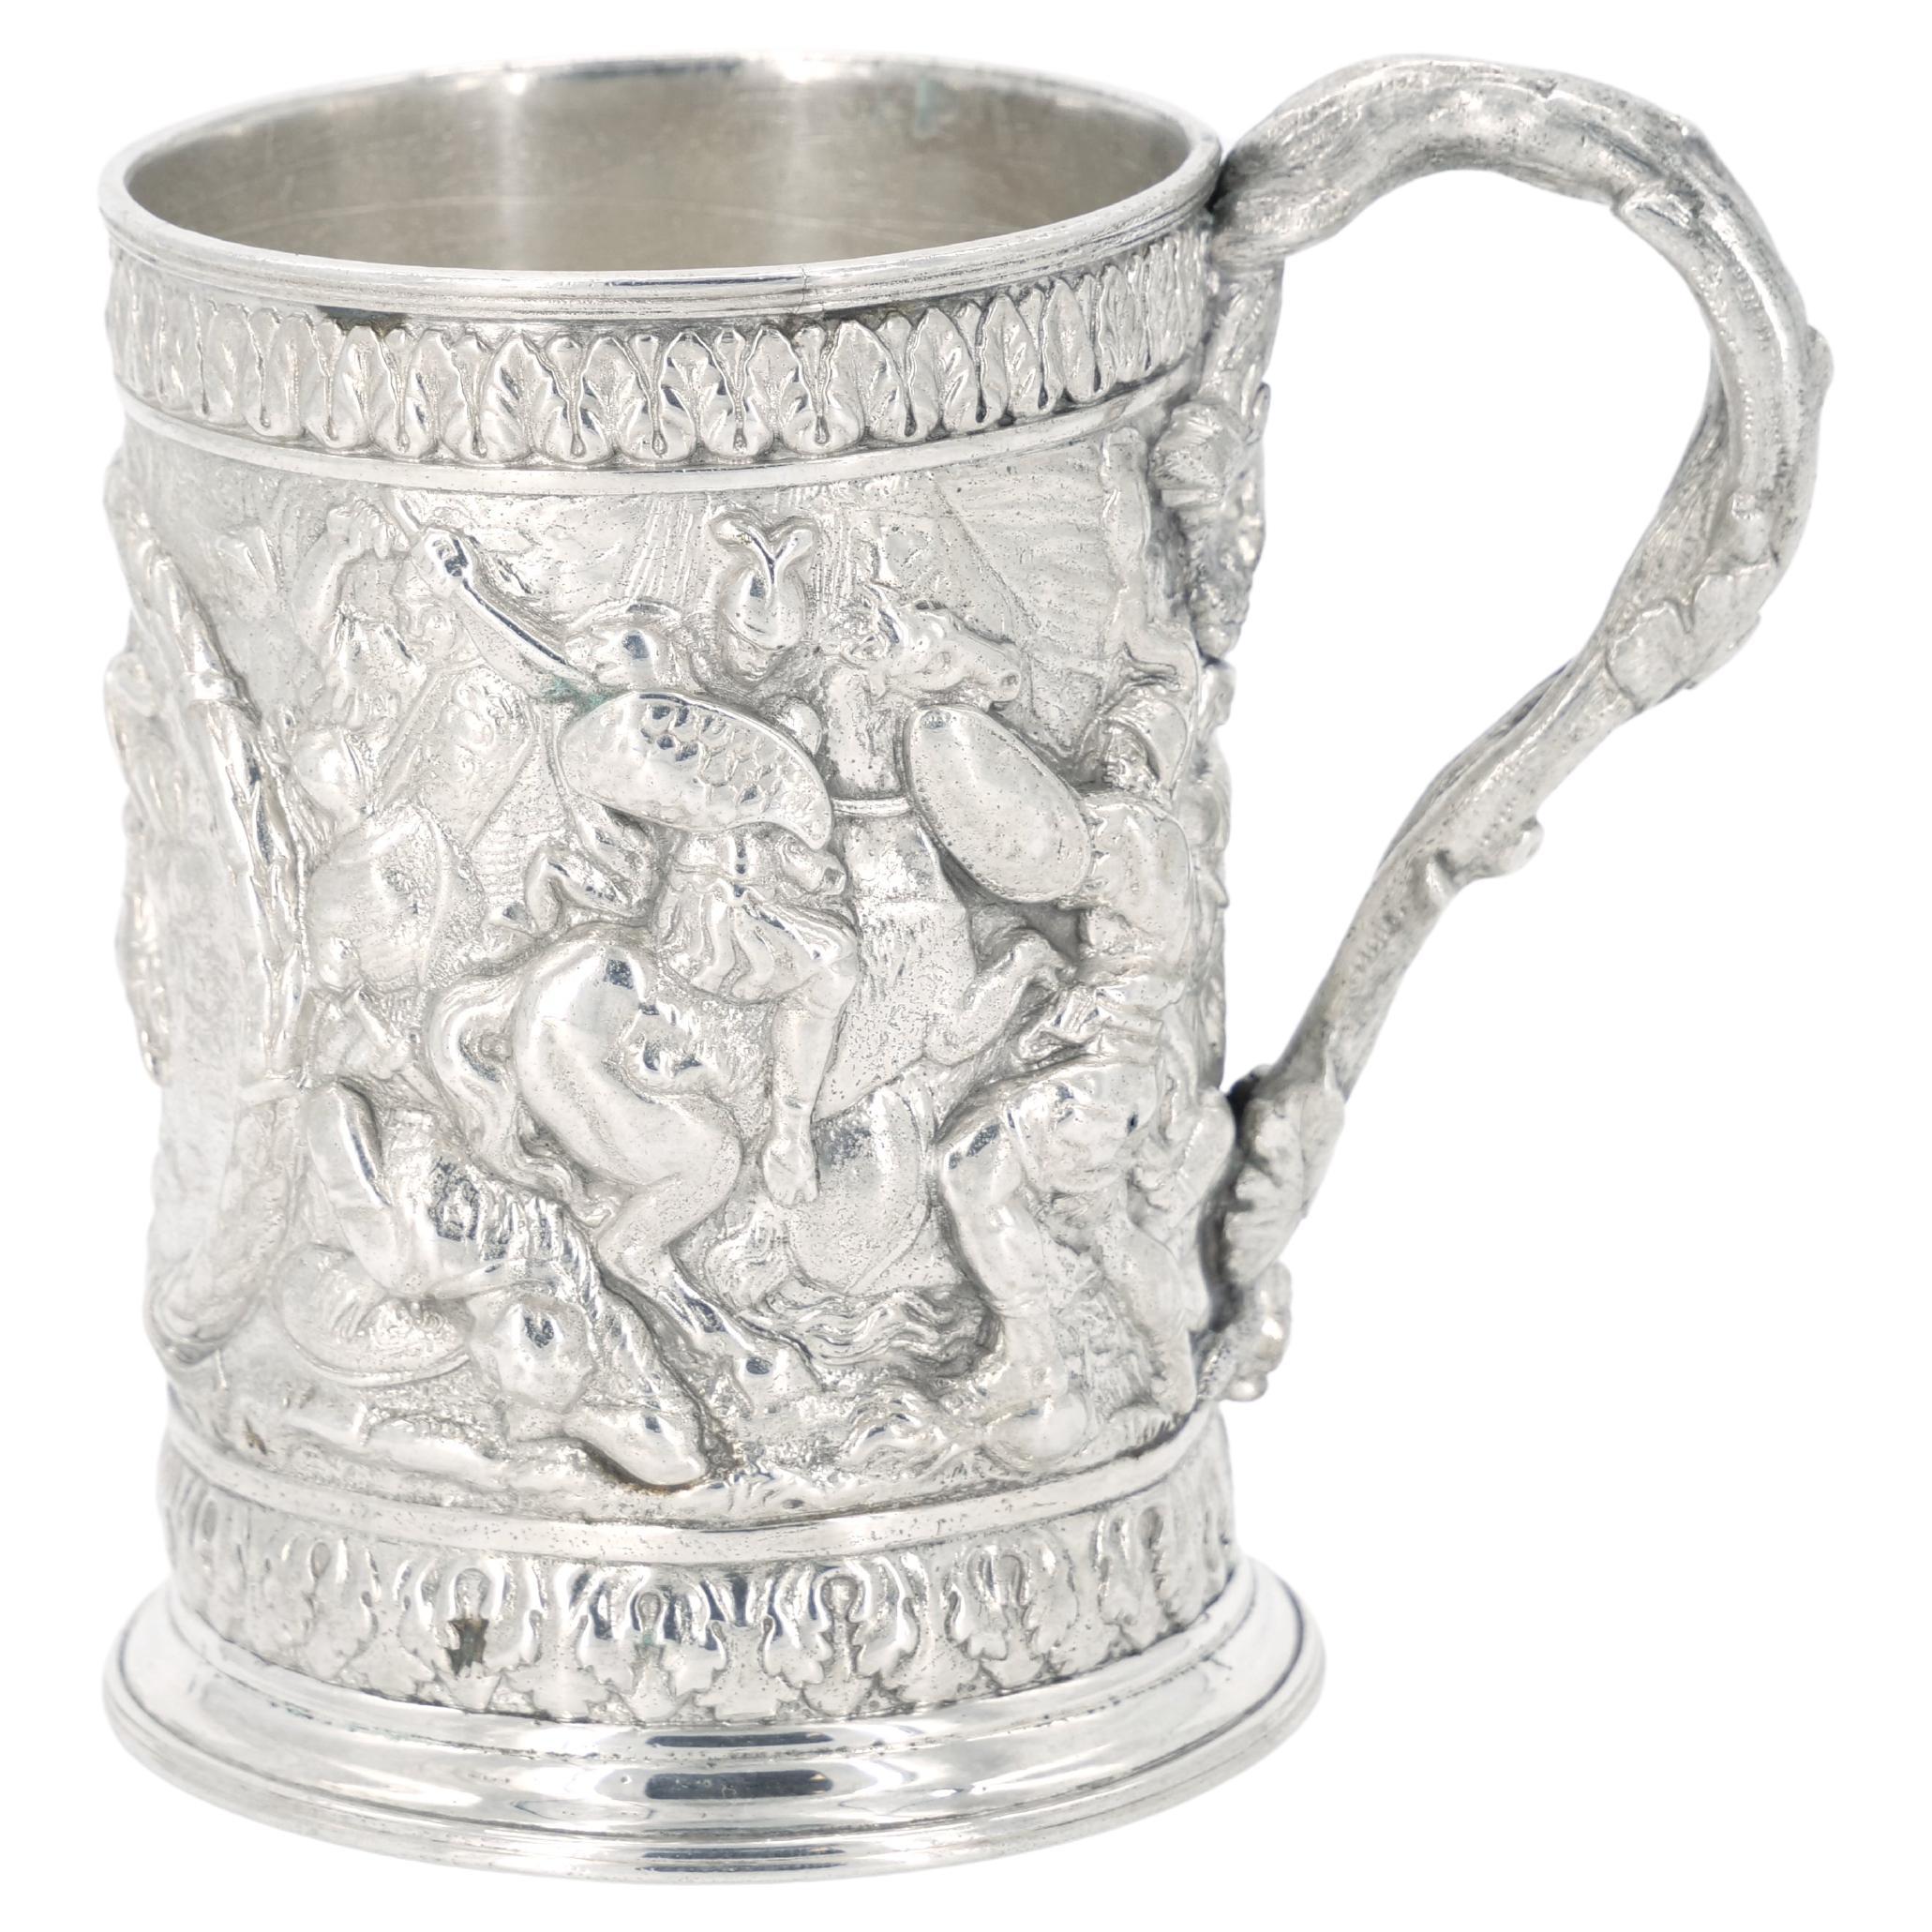 19th Century English Silverplate Barware Mug Depicting Knights in Battle For Sale